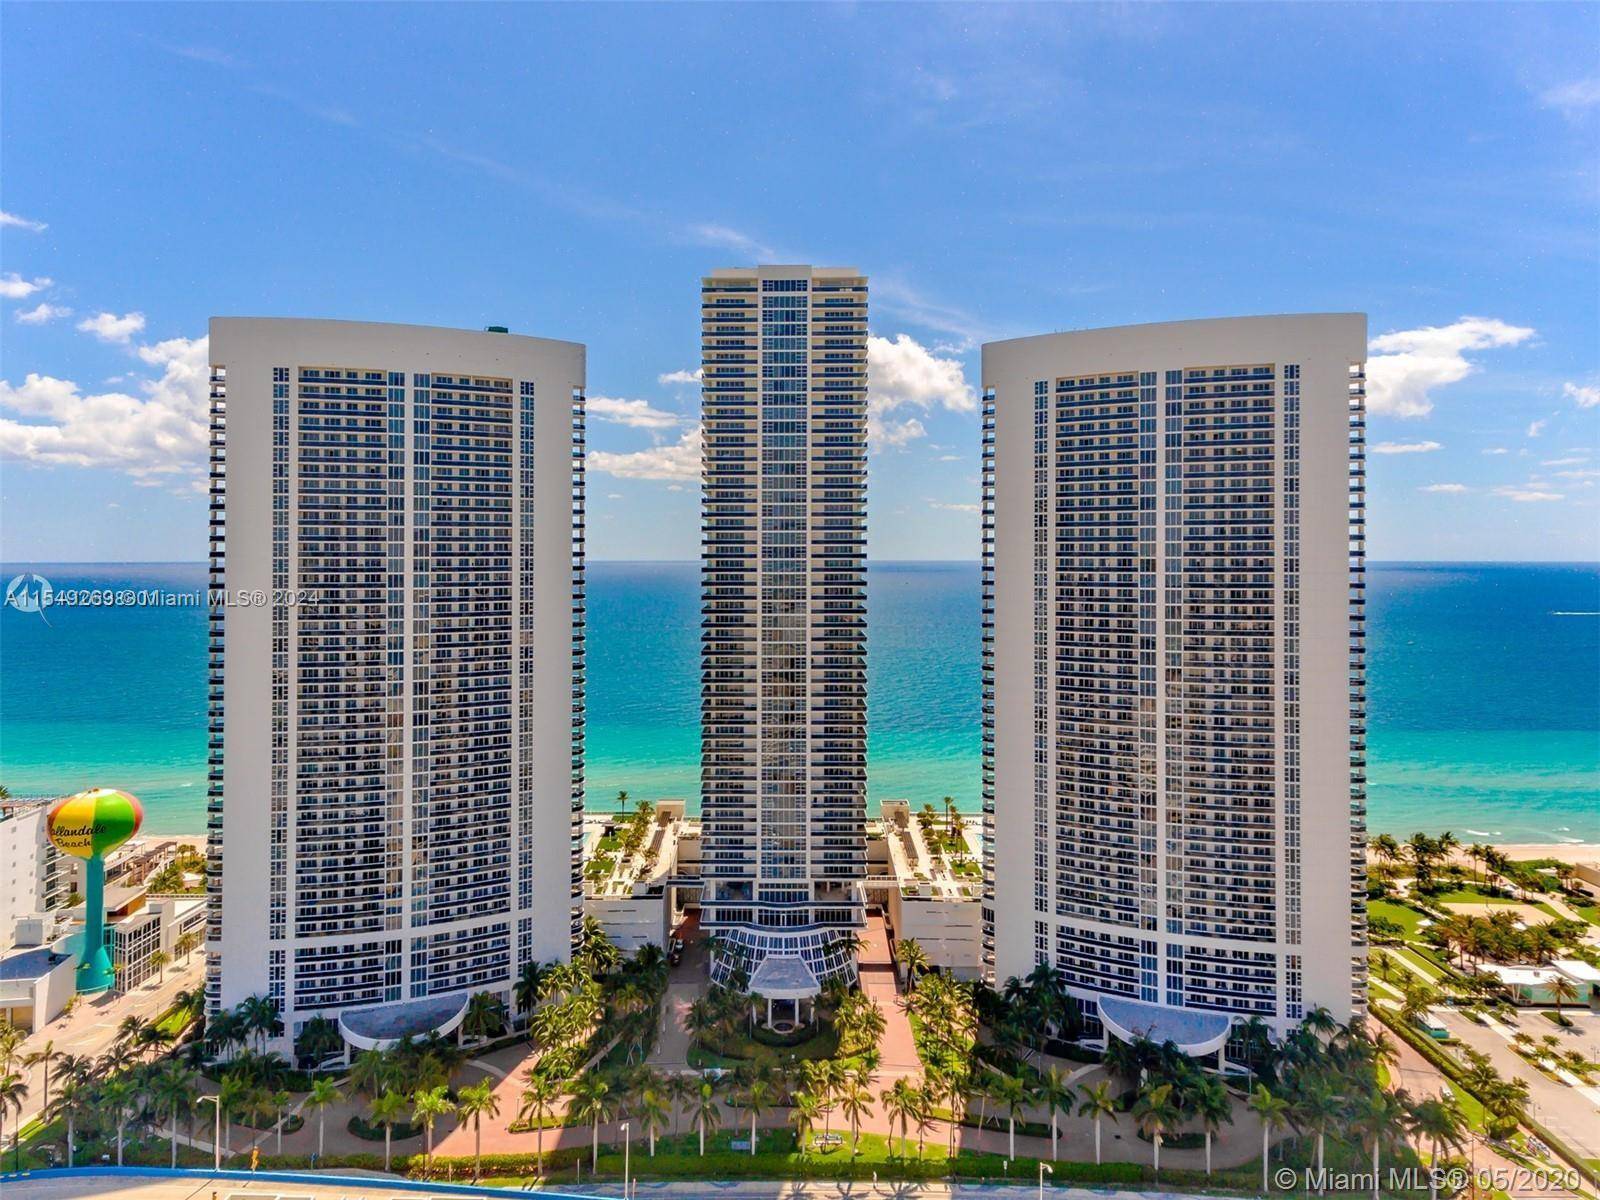 Gorgeous intracoastal unit overlooking City, Bay, Canal and breathtaking sunset city views from this 33th floor.